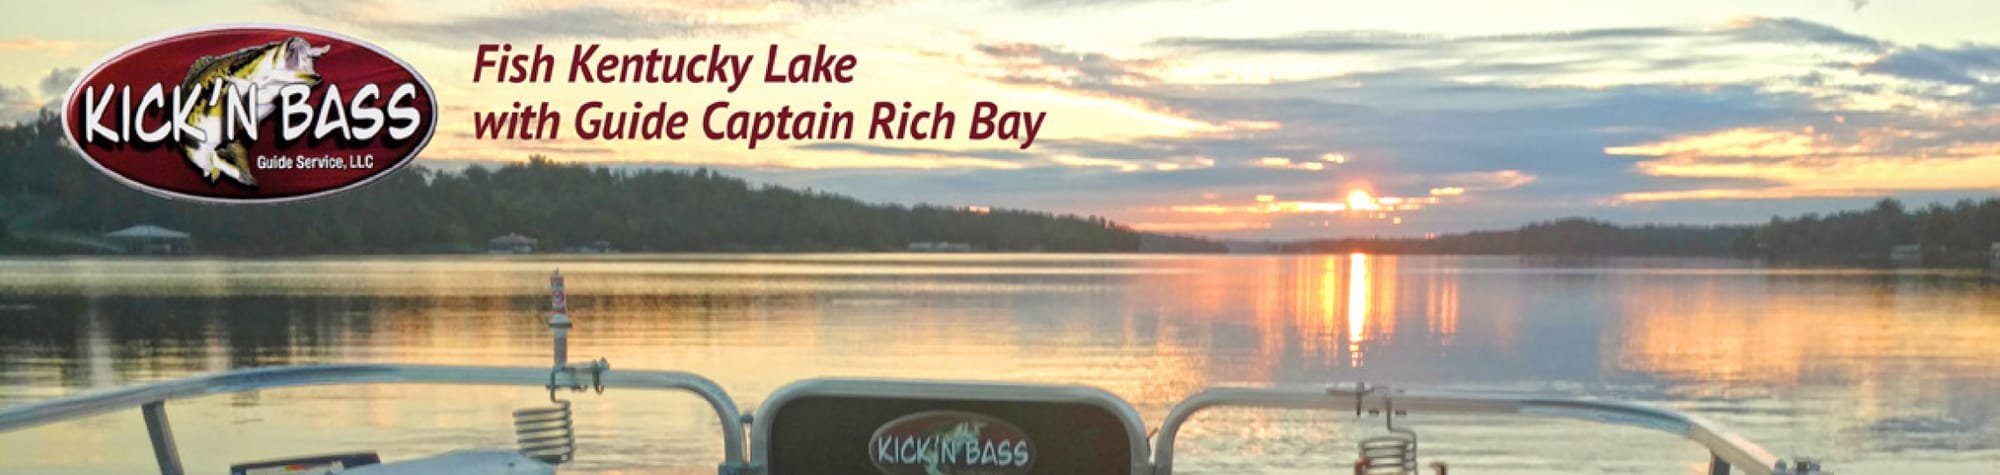 Your Kick'n Bass Fishing Report for March 28, 2019